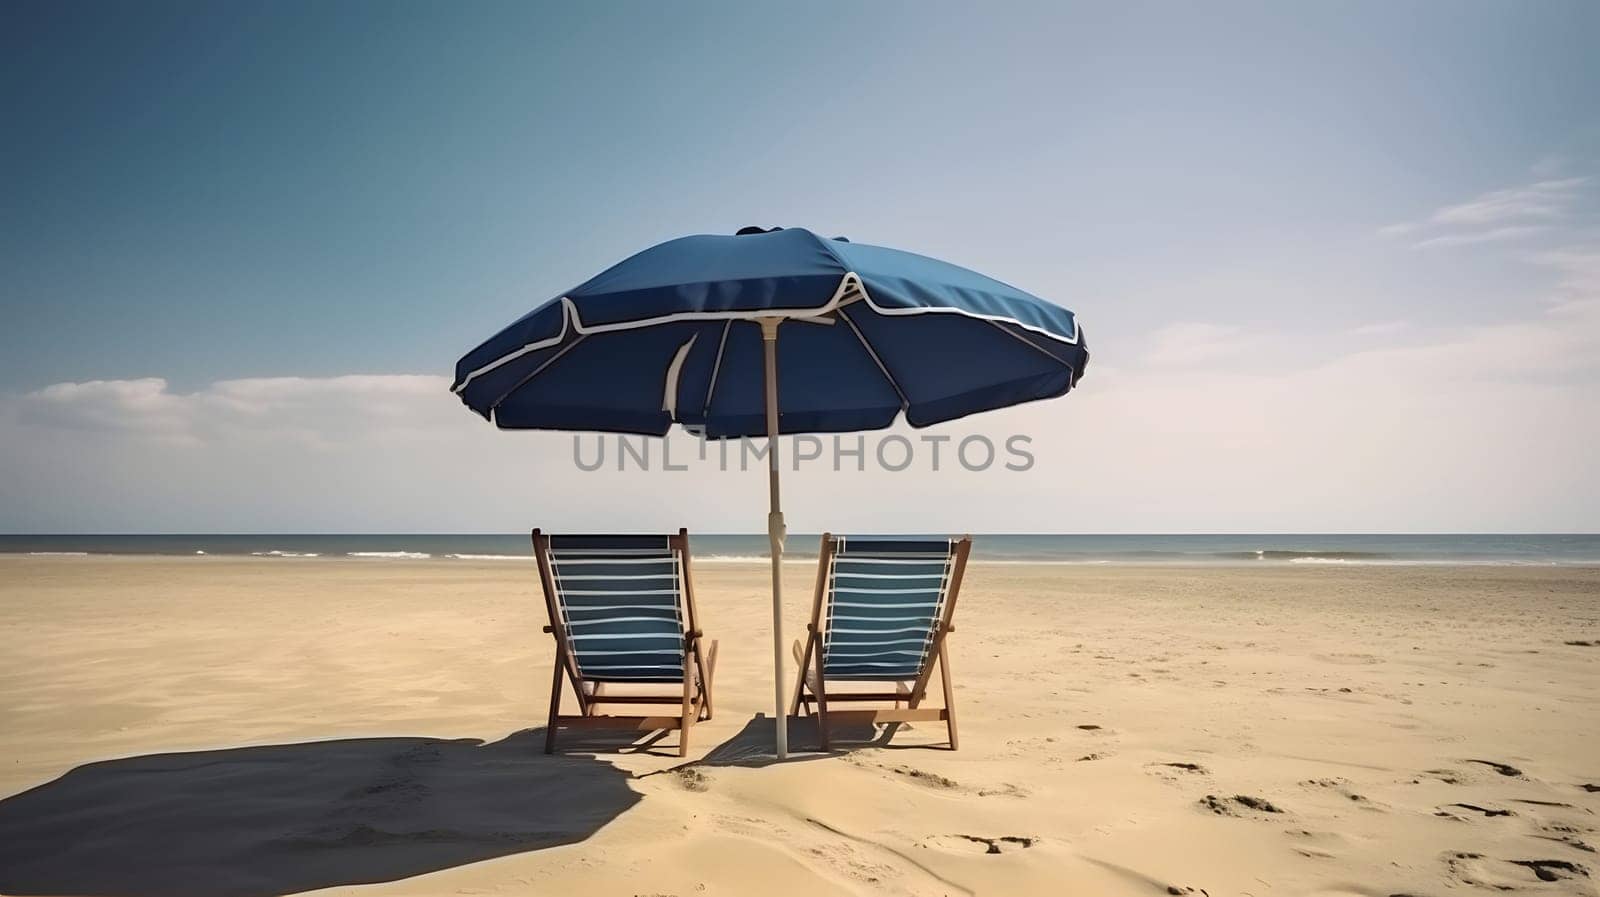 Blue beach umbrella with two chairs on the sand beach - summer vacation theme header, neural network generated art by z1b